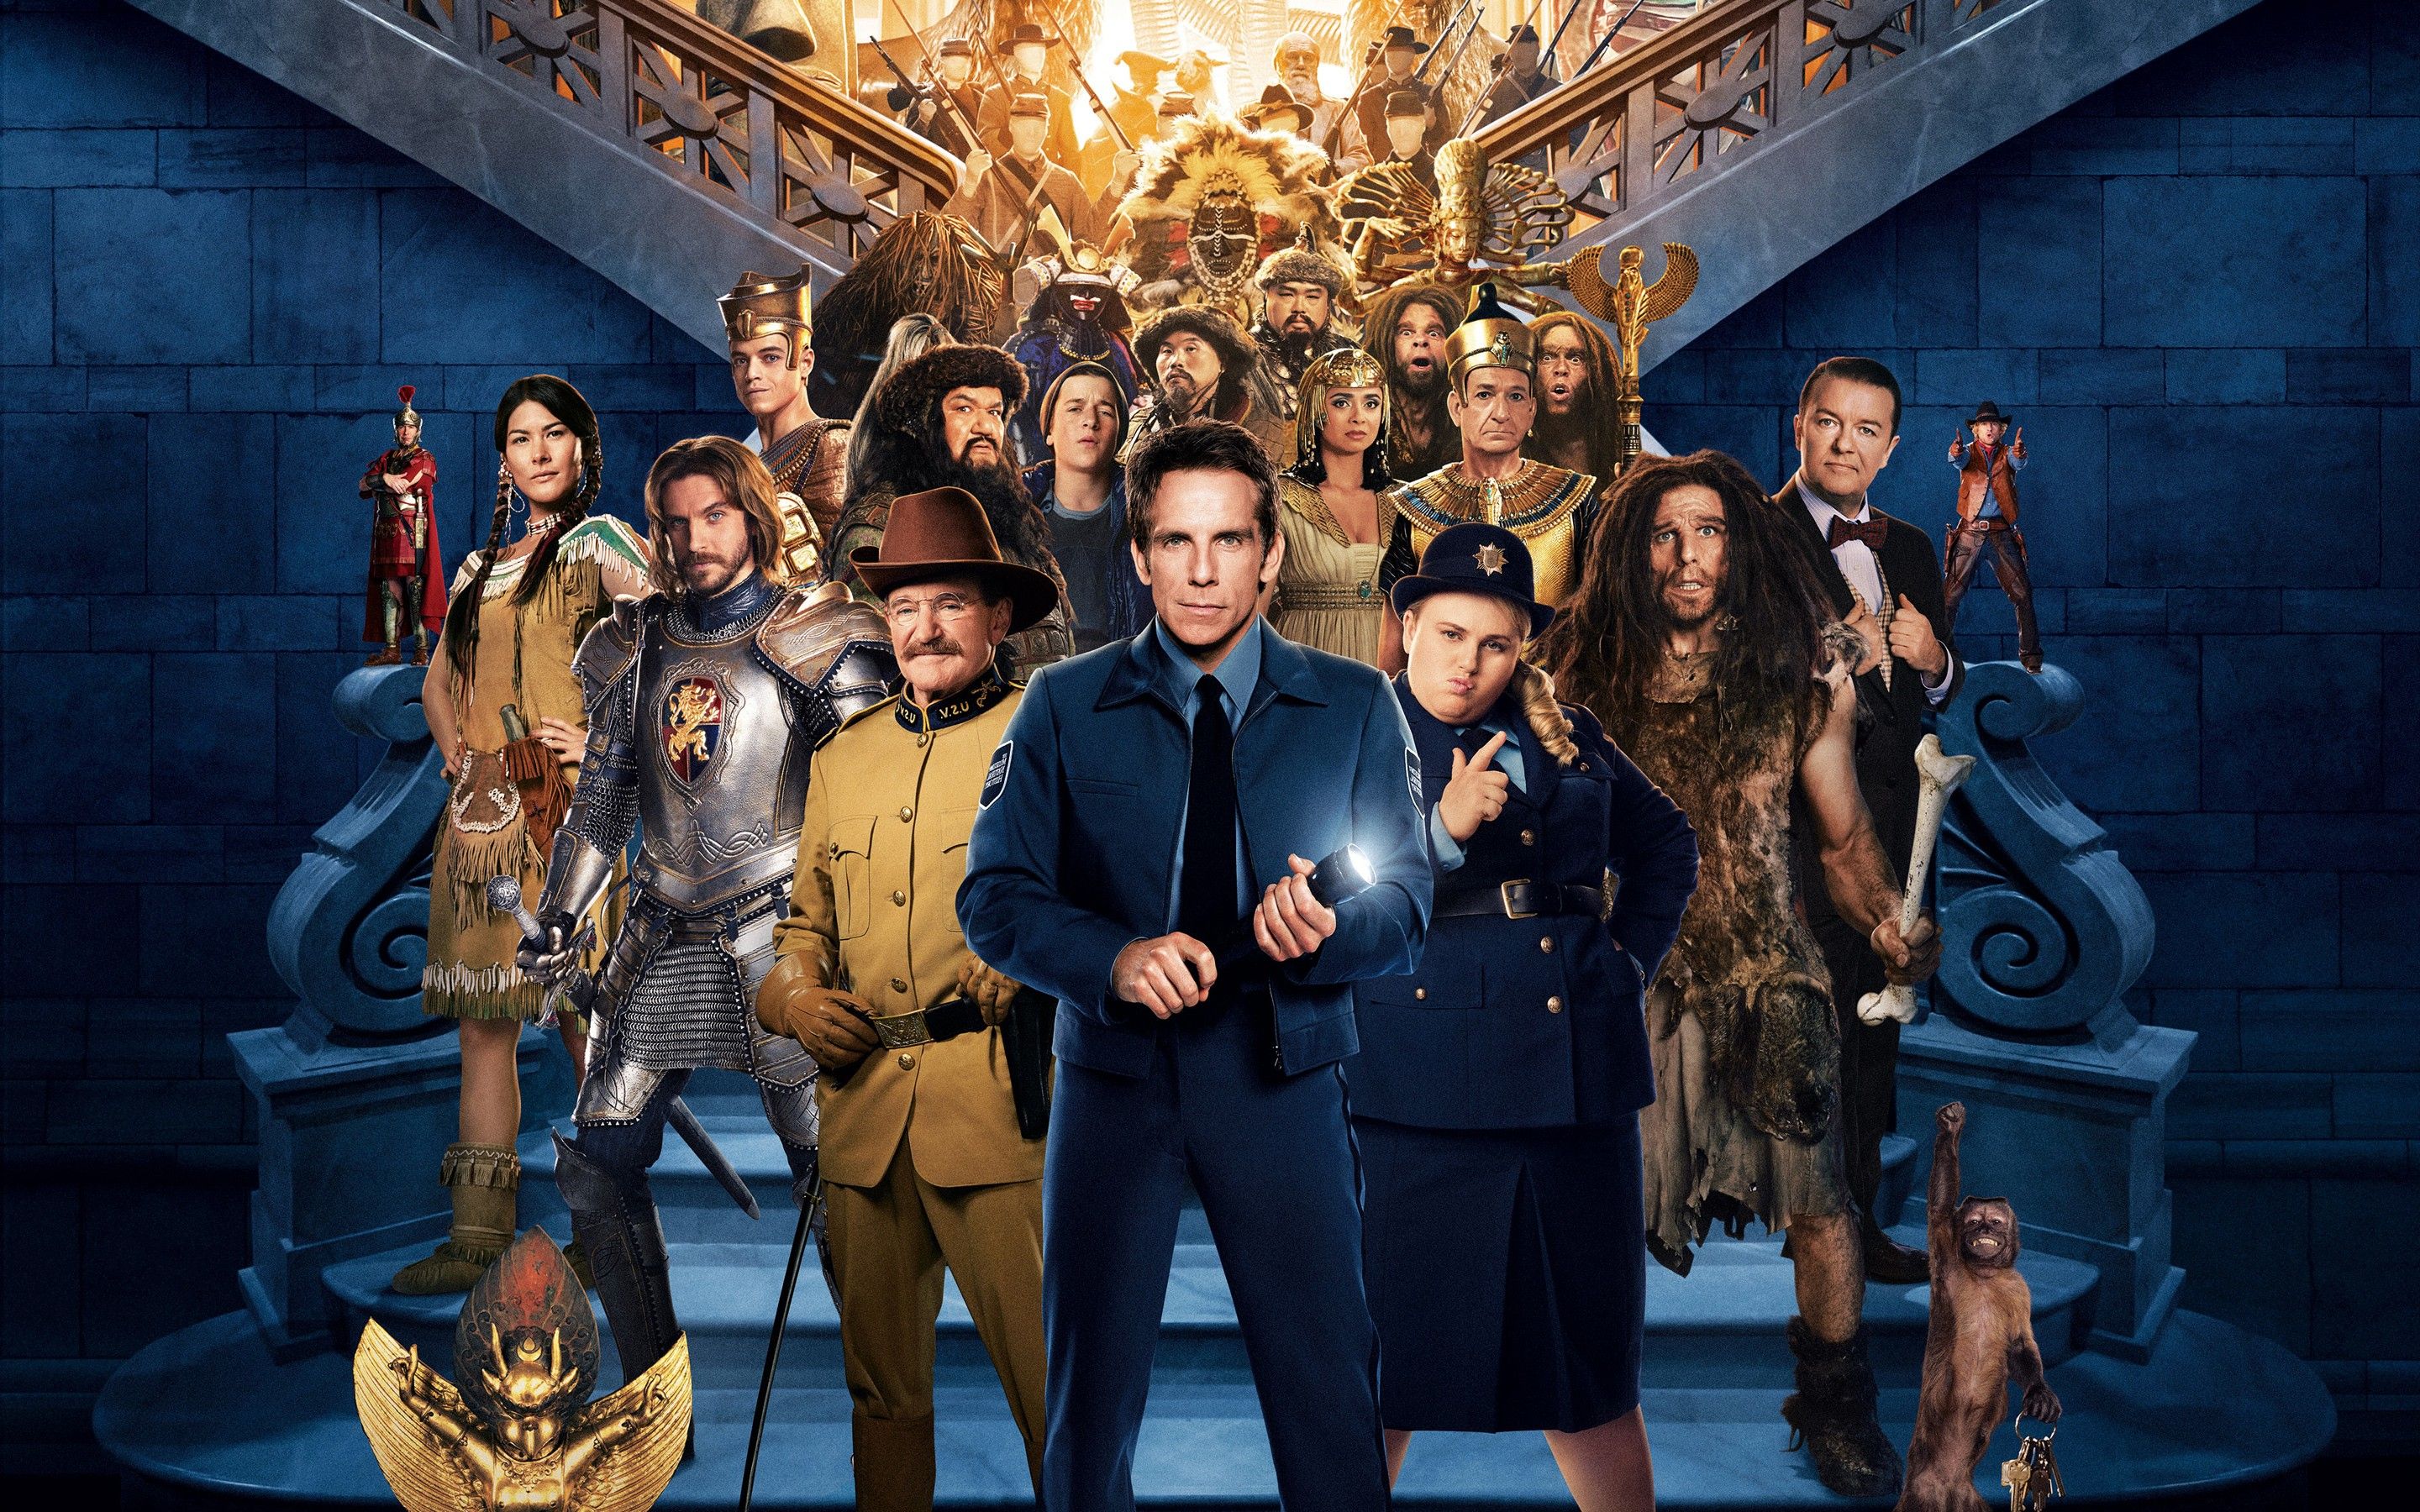 night at the museum 2014 movie in hindi